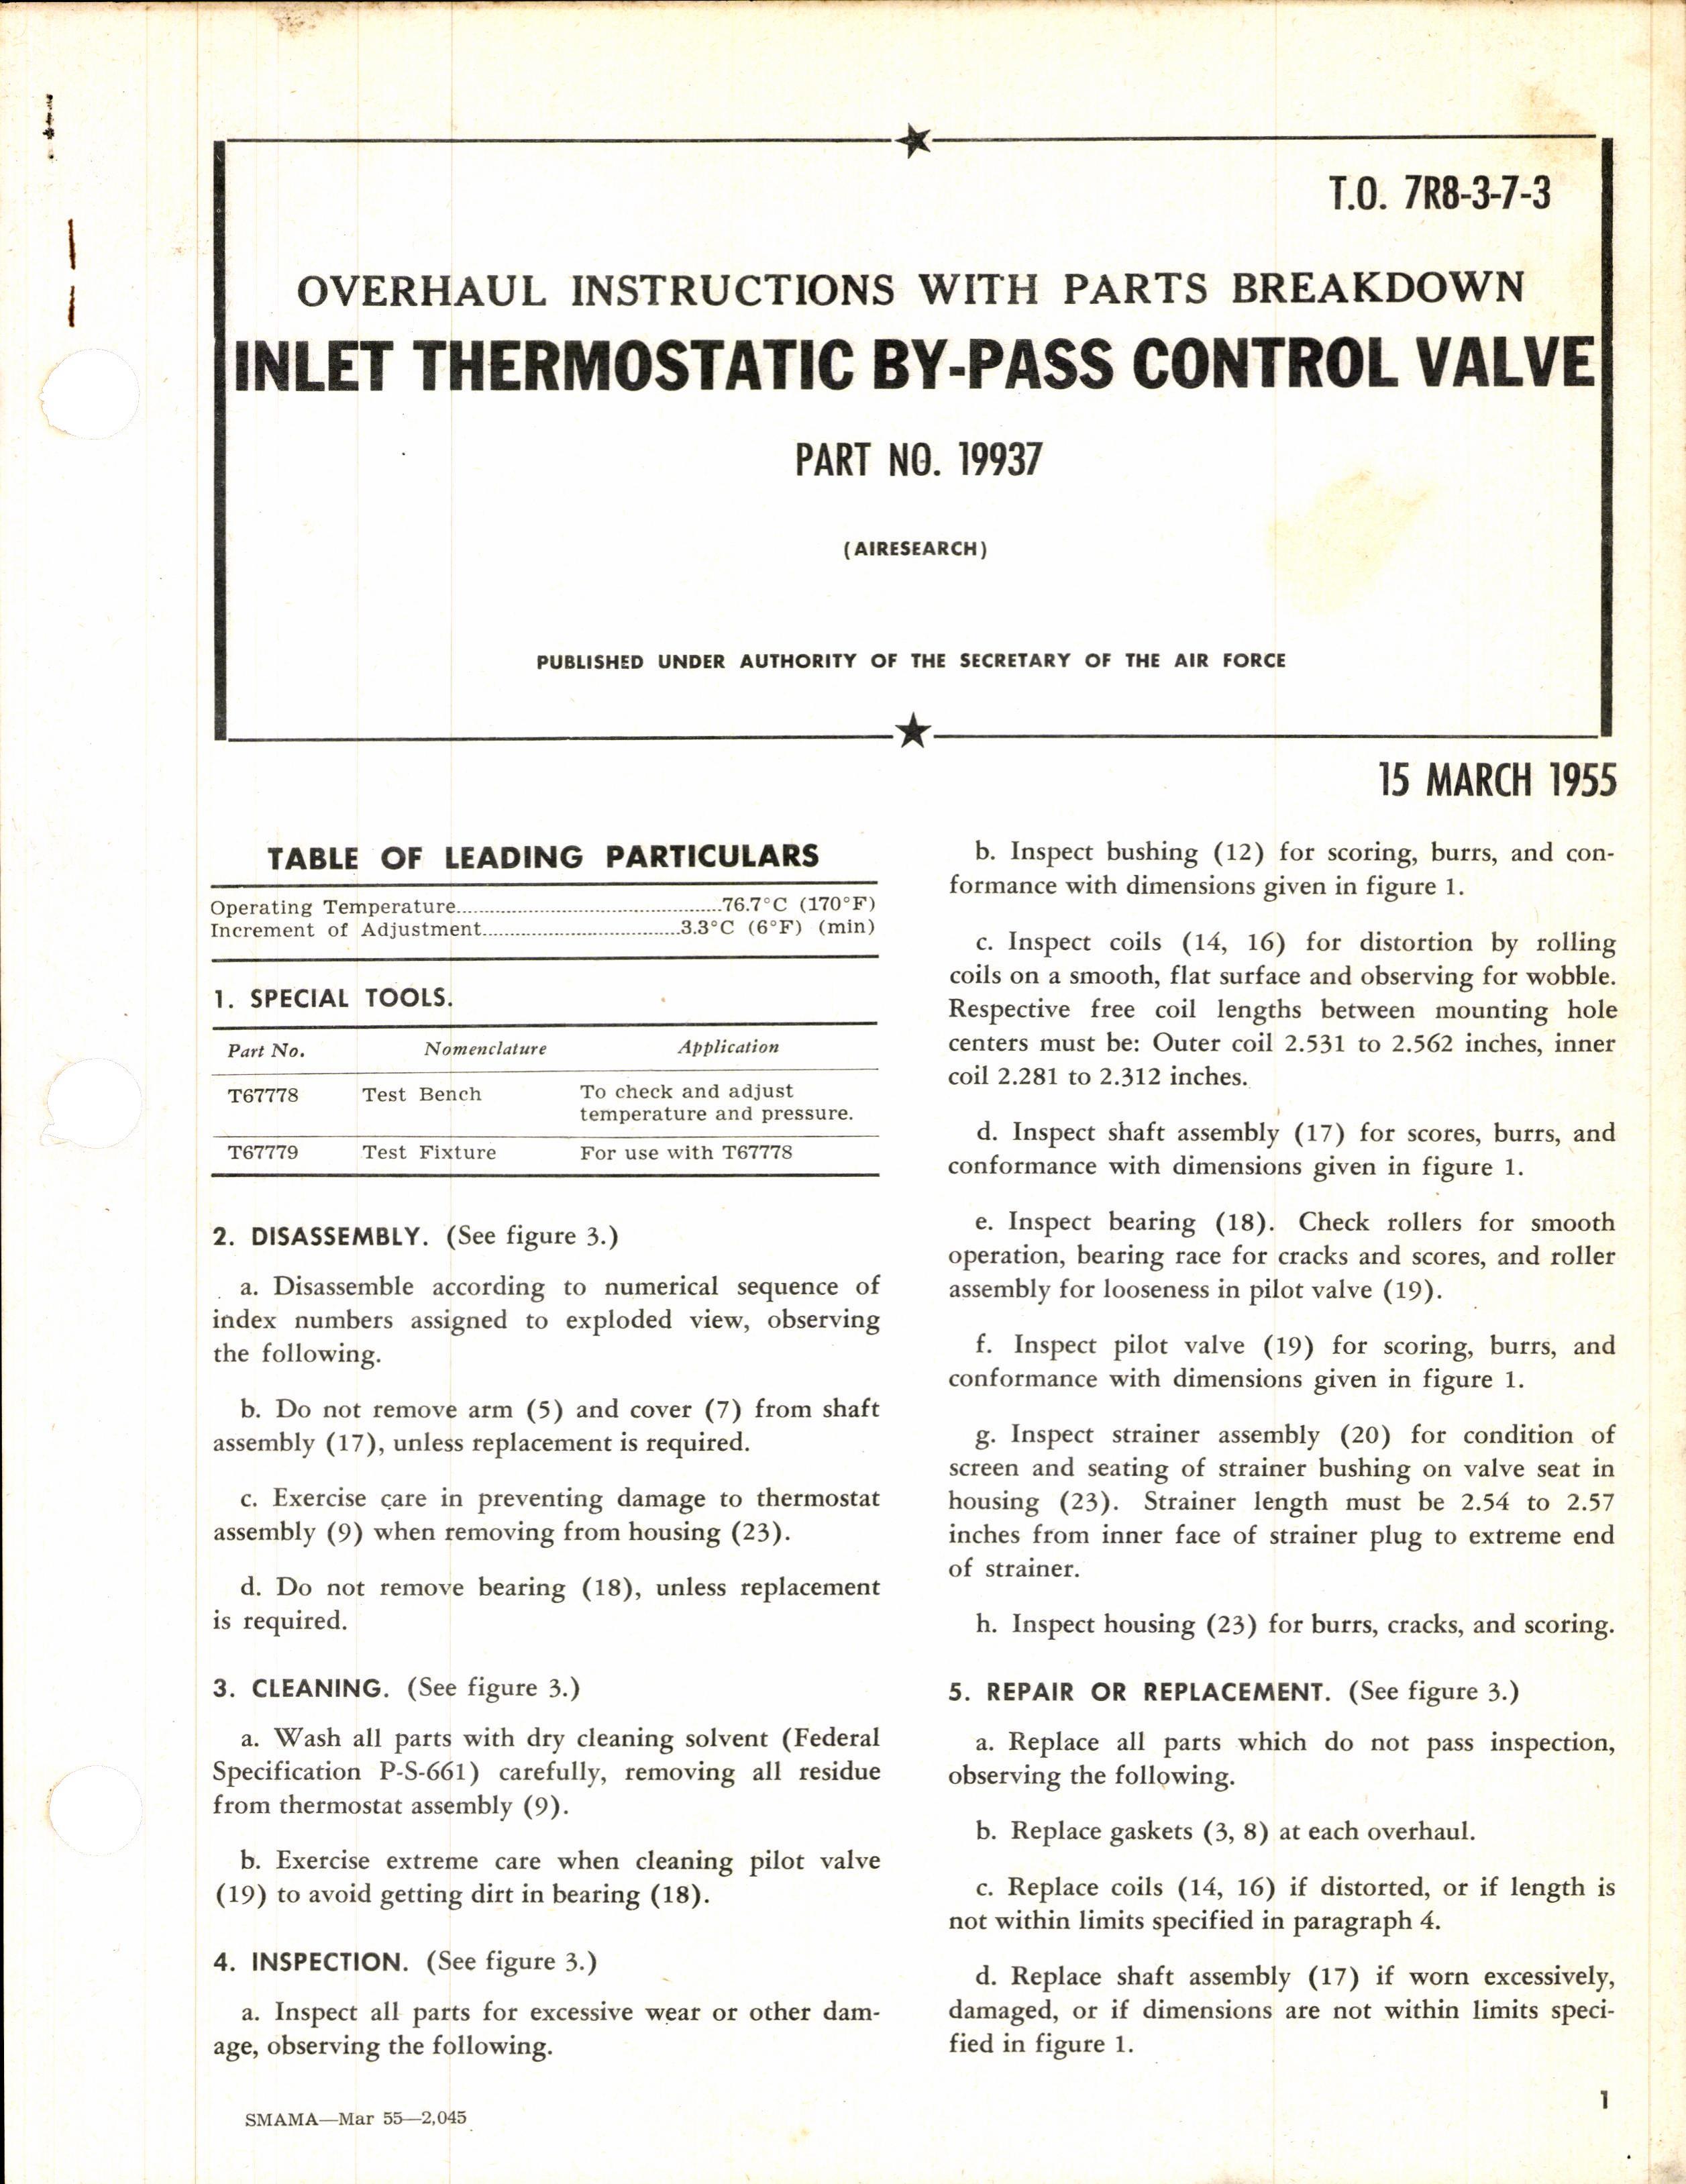 Sample page 1 from AirCorps Library document: Overhaul Instructions with Parts Breakdown For Inlet Thermostatic By-Pass Control Valve